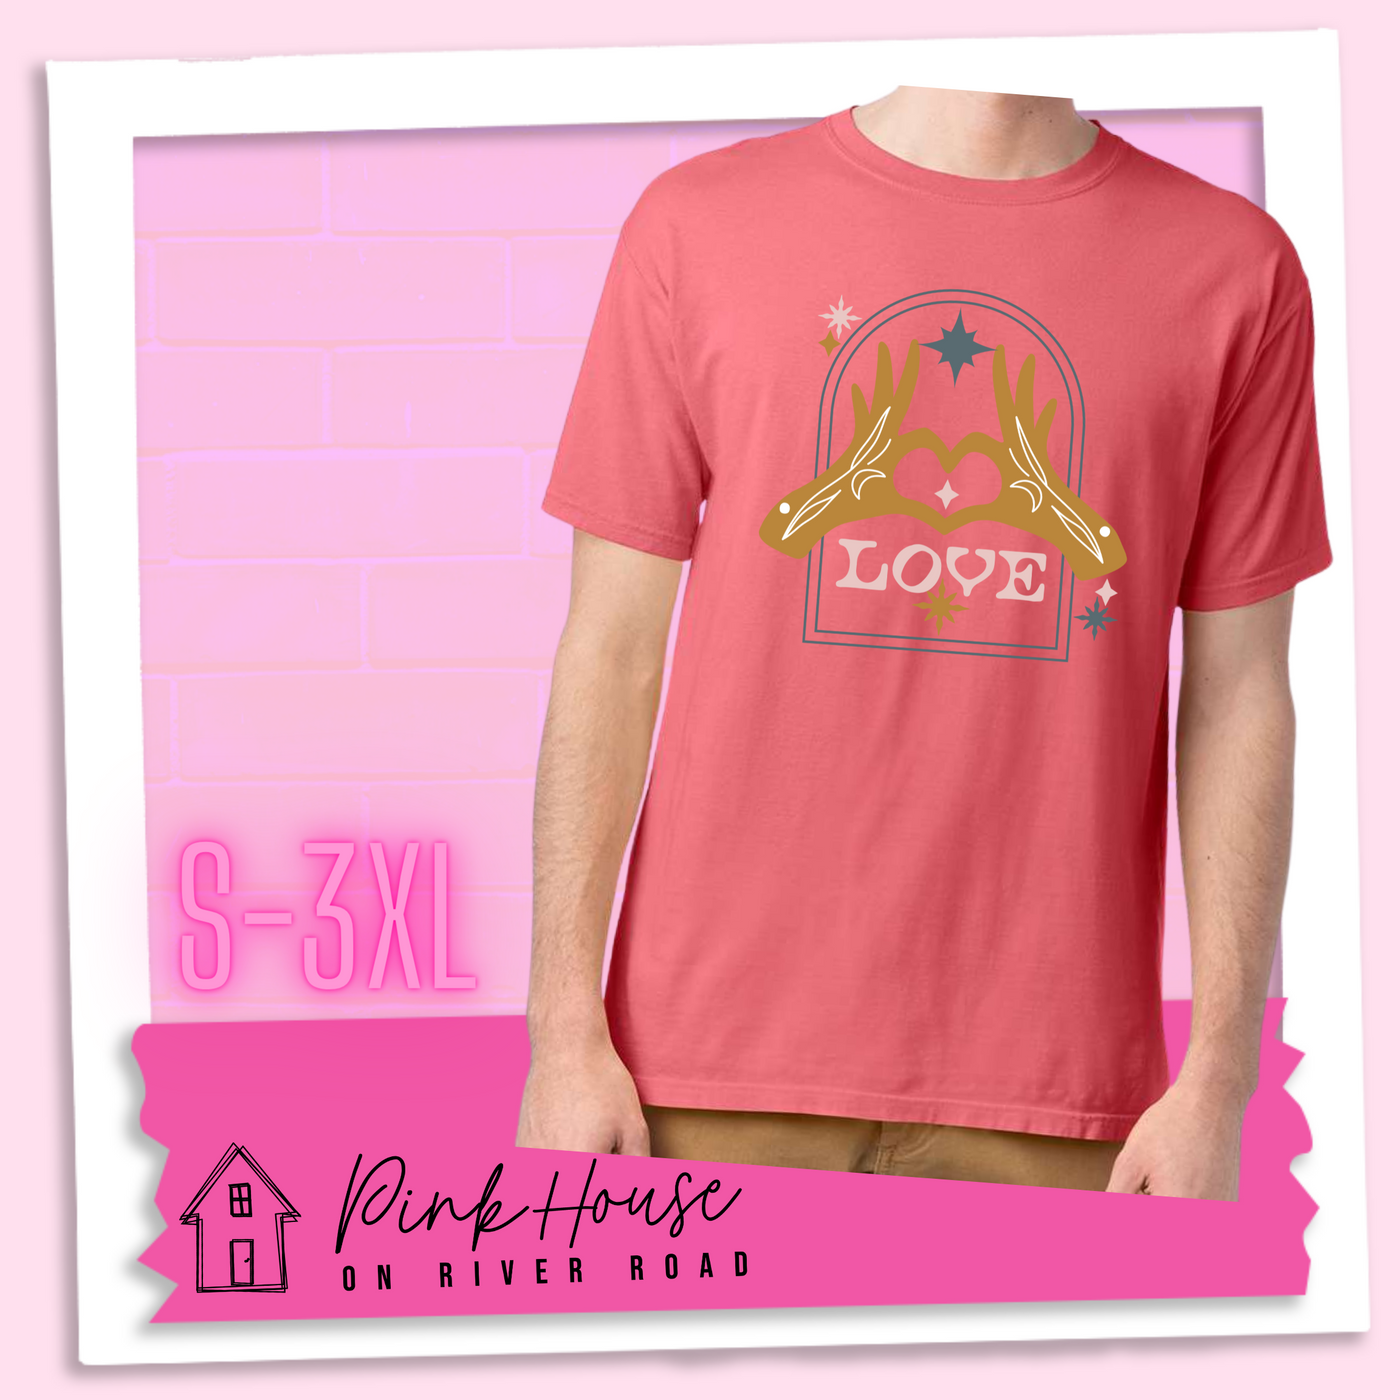 Coral tee with a graphic. Graphic is of two tattooed hands making a heart in front of an archway with stars and the word Love in the archway.